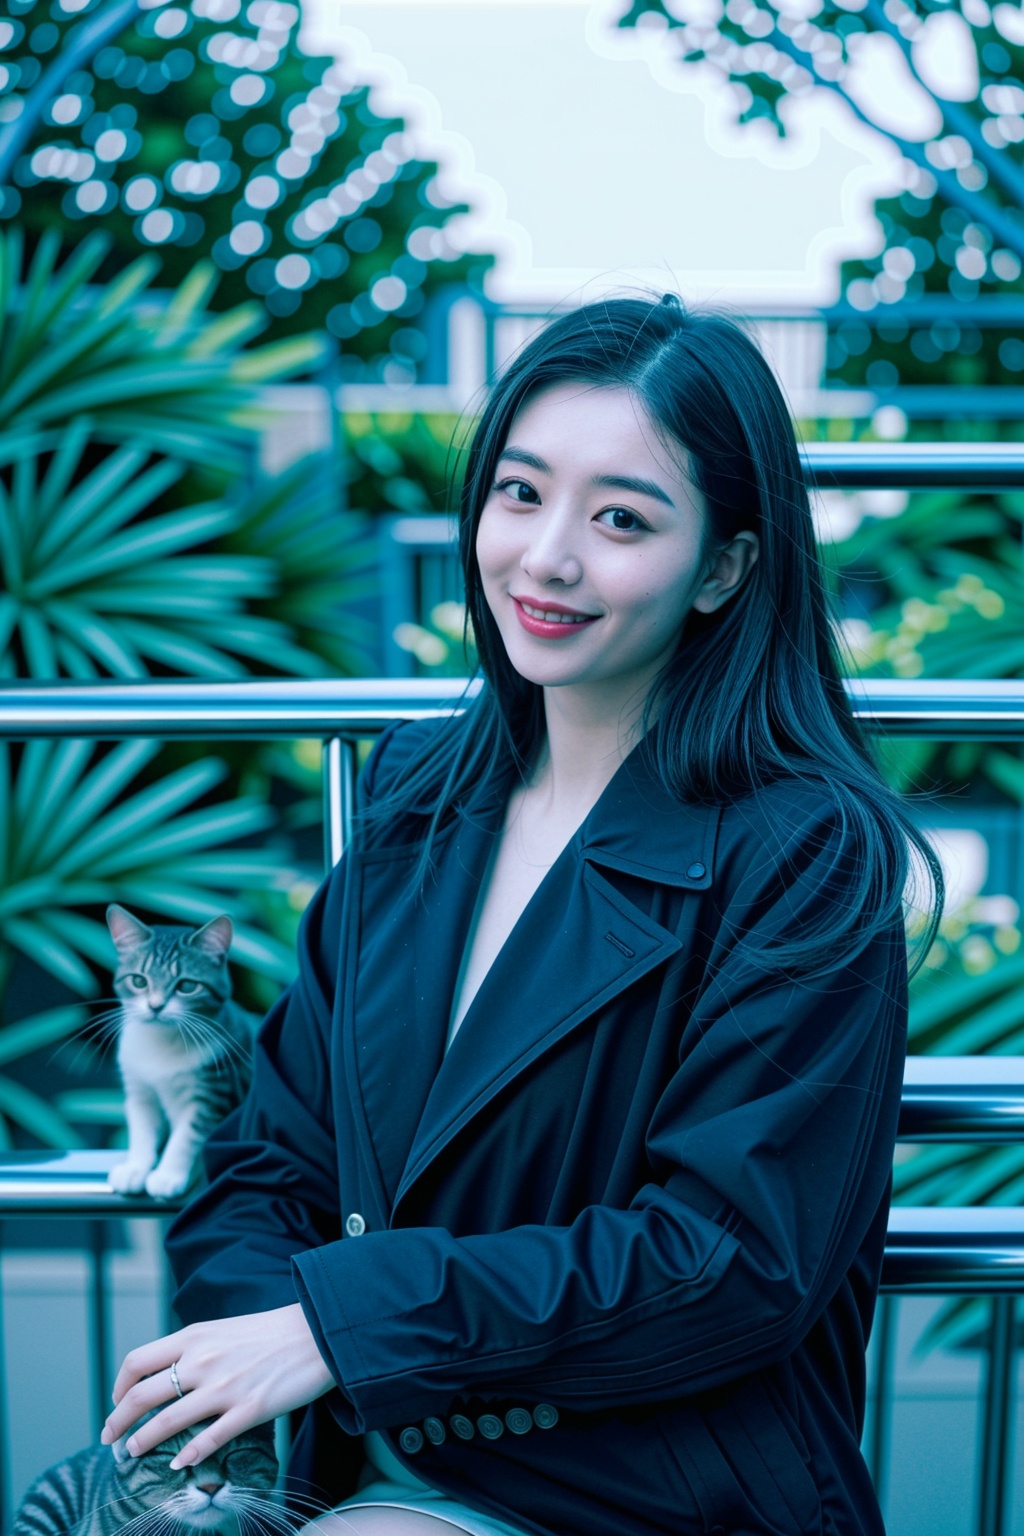  The image features a beautiful young Asian woman with long, dark hair sitting on a balcony with a cat in the background. The woman is looking into the camera with a smile on her face, her eyes sparkling with joy and contentment. Her hair is neatly styled and her makeup is natural yet enhance her features. She wears a black coat that complements her skin tone. The lighting in the image is natural and warm, casting a soft glow on the woman and the surrounding environment. The colors in the image are vibrant and rich, with the blue sky and green trees in the background providing a beautiful contrast to the woman and the cat. The style of the image is casual yet elegant, with the woman's outfit and the setting creating a relaxed and comfortable atmosphere. The quality of the image is excellent, with sharp details and smooth transitions between colors and tones. The woman's action in the image is sitting and smiling, with her hands resting on the railing. Her posture and facial expression convey a sense of happiness and contentment, as if she is enjoying a peaceful and pleasant moment. The woman's expression and the overall atmosphere of the image suggest a sense of relaxation and enjoyment. She seems to be in a good mood, perhaps enjoying a leisurely day or spending time with her cat. The image captures a moment of tranquility and happiness, making it a beautiful and memorable scene.,,<lora:660447313082219790:1.0>